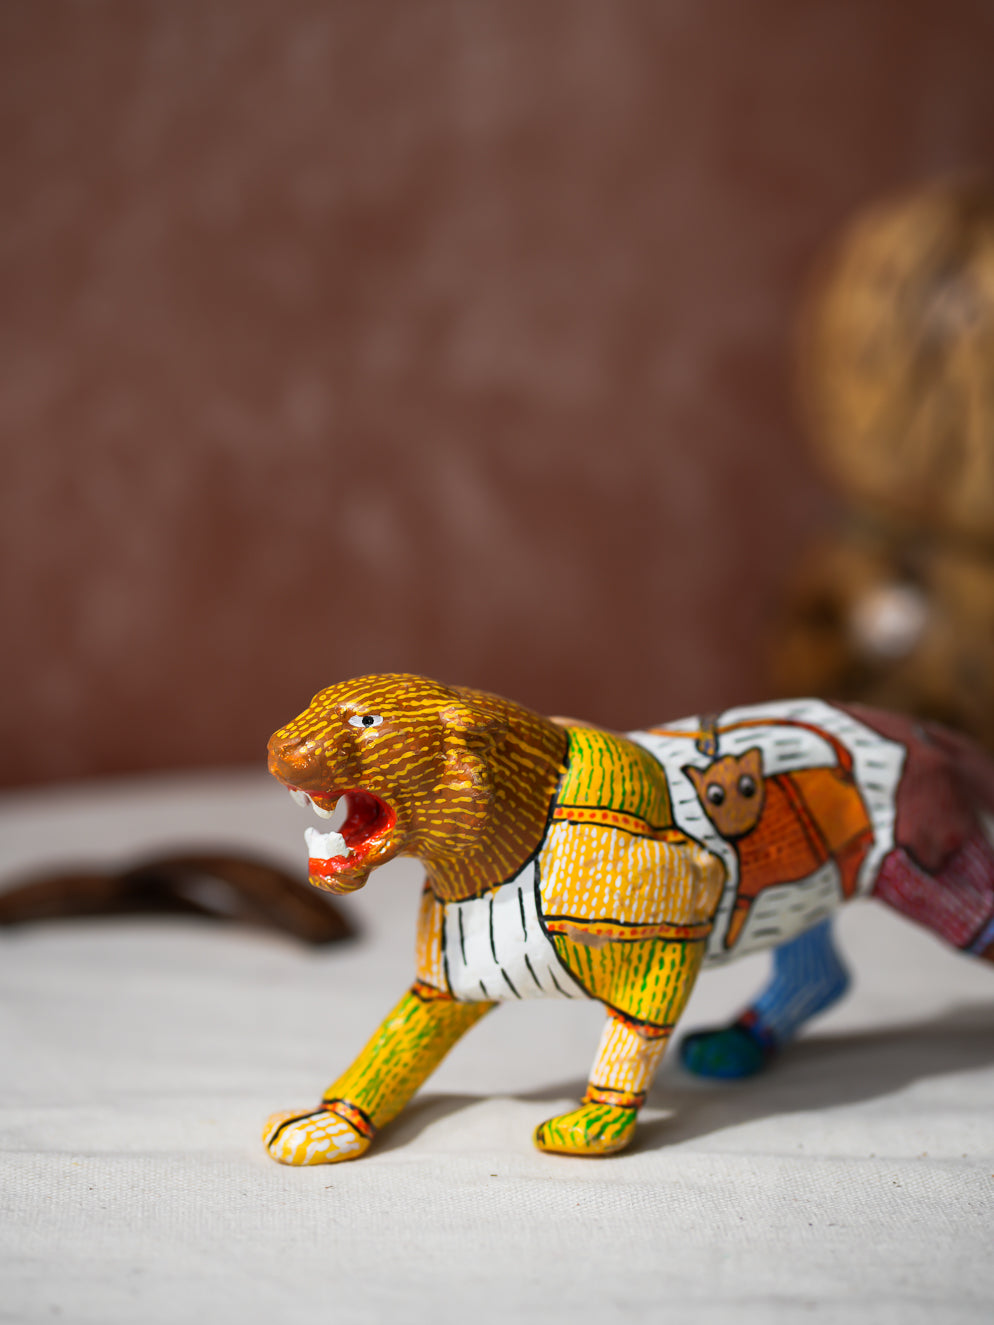 Load image into Gallery viewer, Exclusive Gond Art Tiger Curio- The Jungle